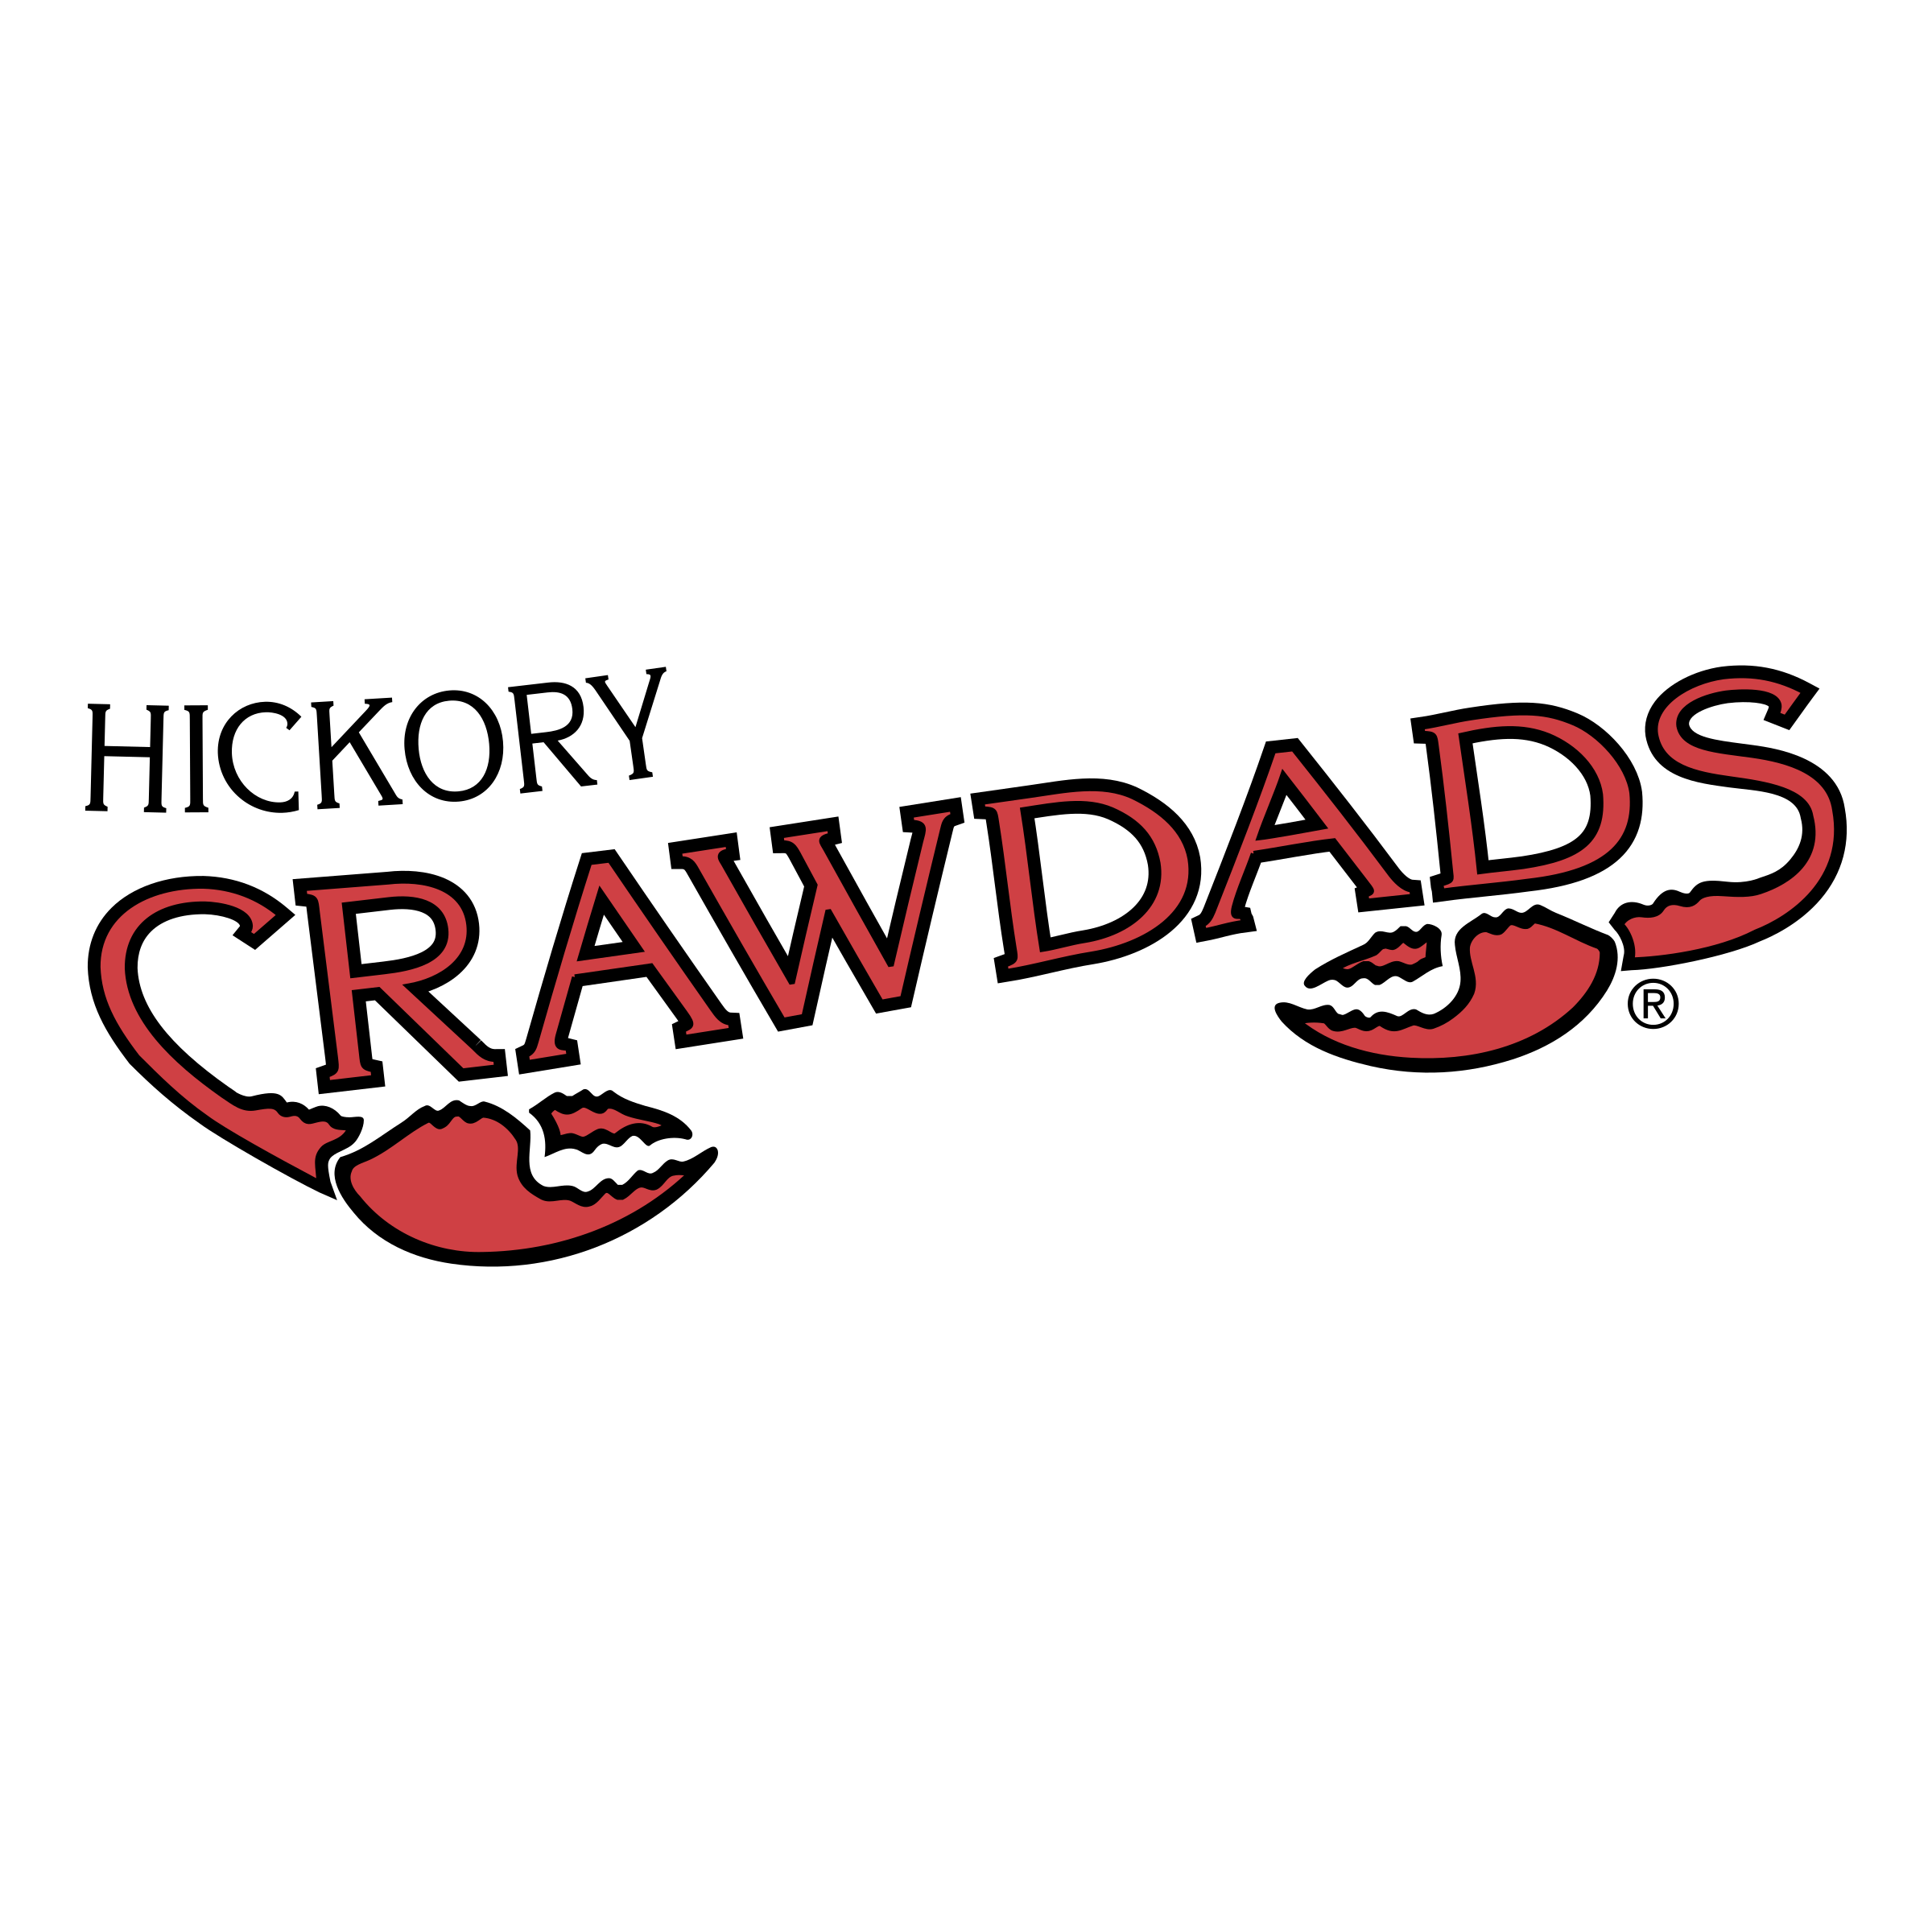 Hickory Crawdads PNG HD Quality